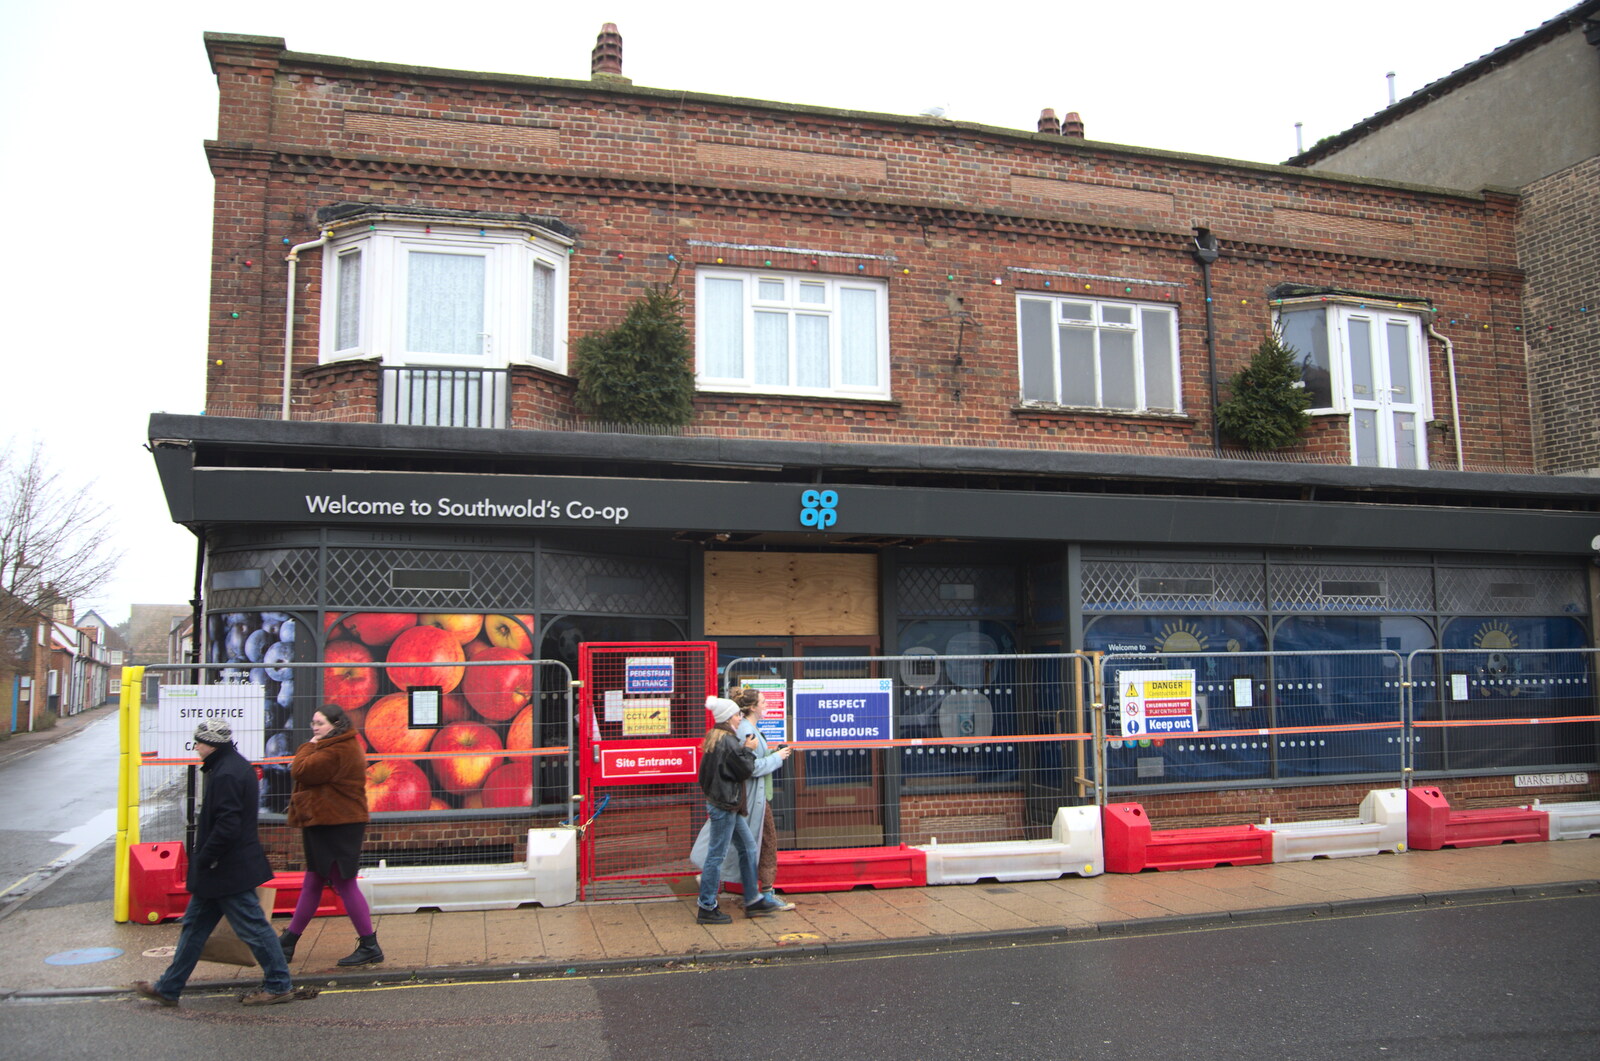 The Southwold Co-op is closed for a refit from A Few Hours at the Seaside, Southwold, Suffolk - 27th December 2021